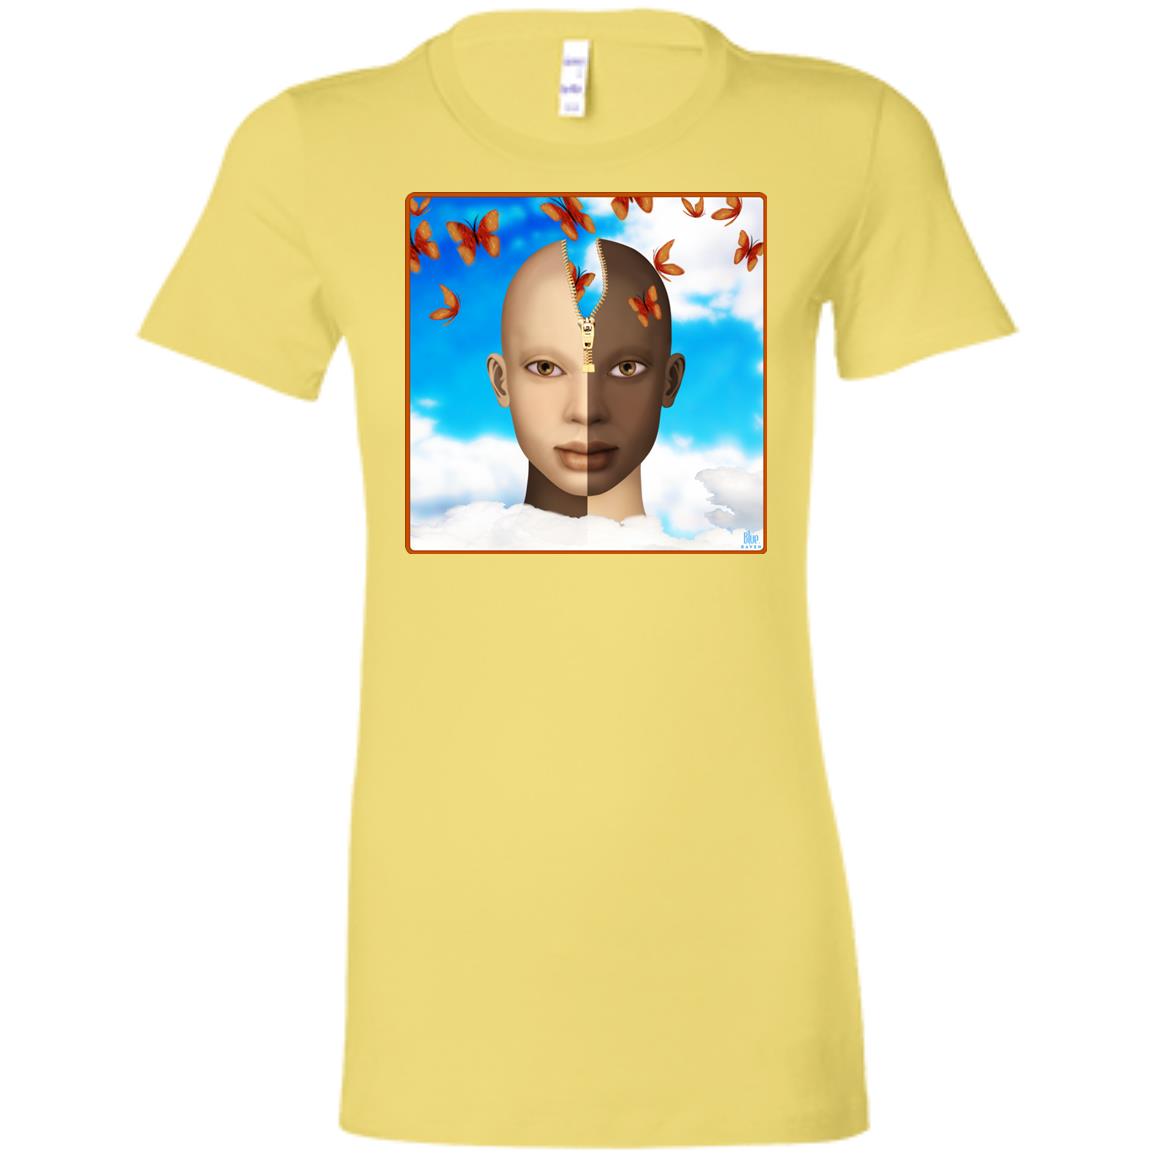 Color Of Our Thoughts - Women's Fitted T-Shirt